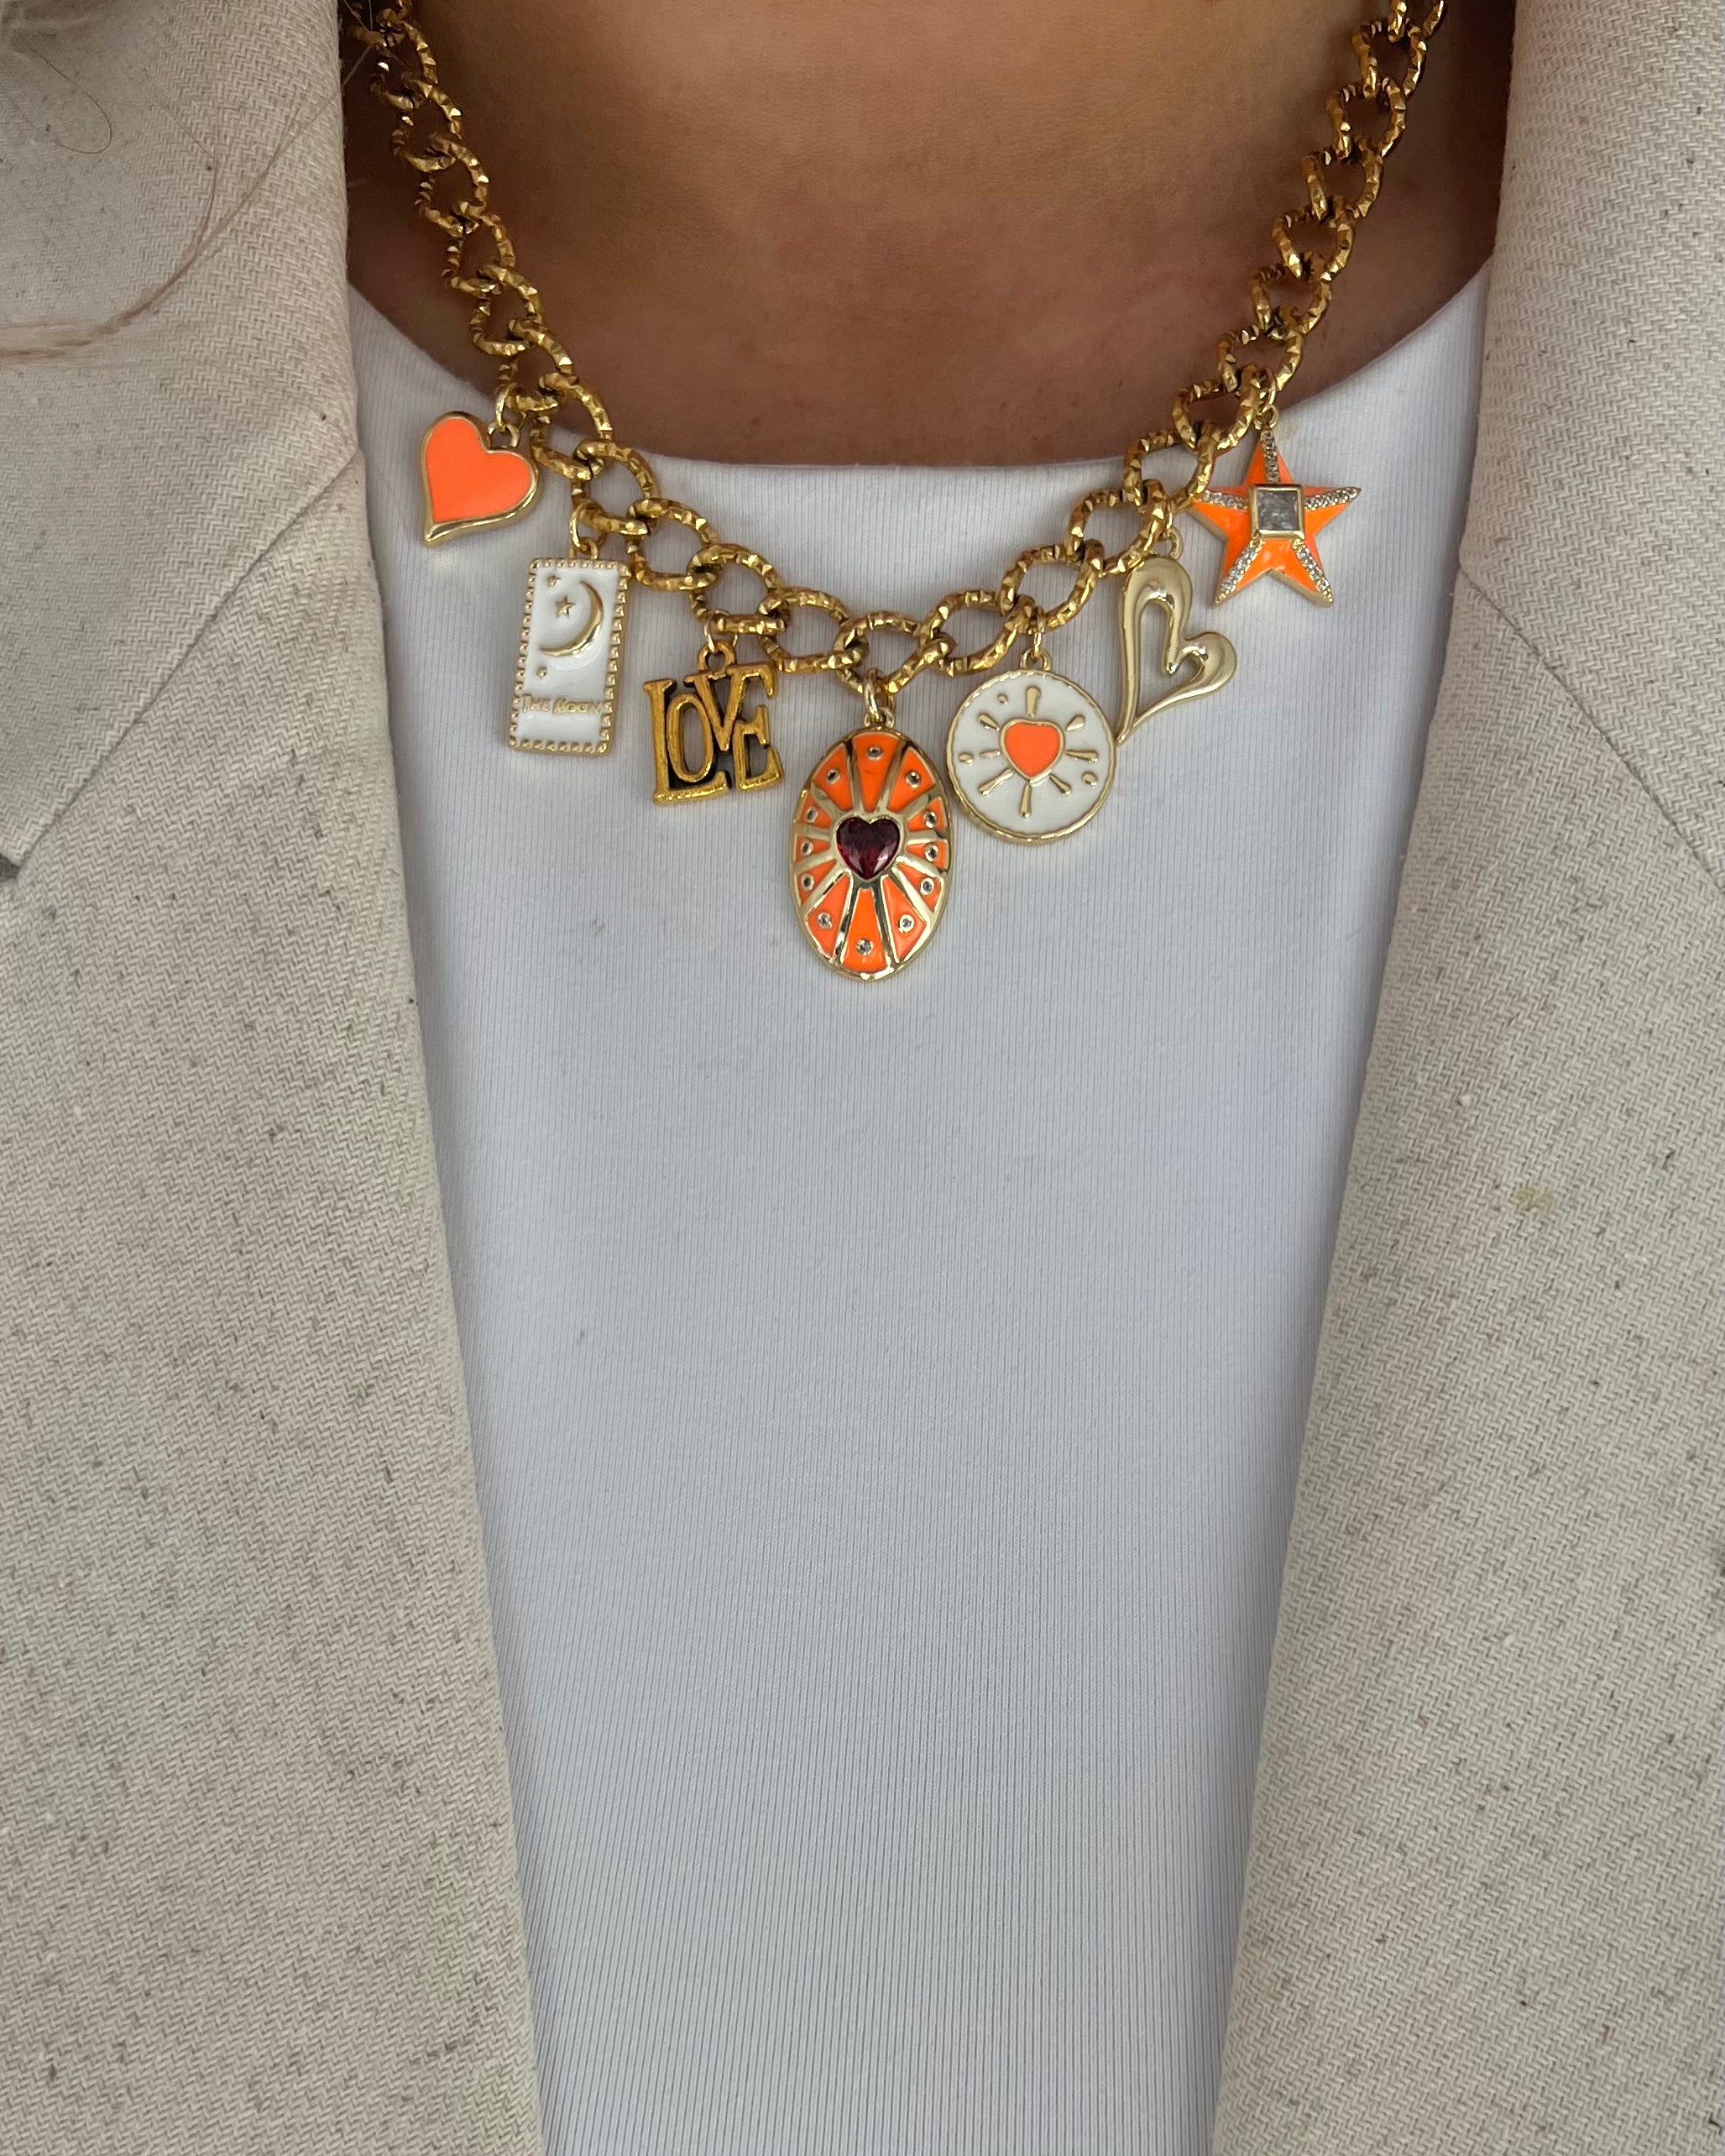 “Kingsday special II” charm necklace gold